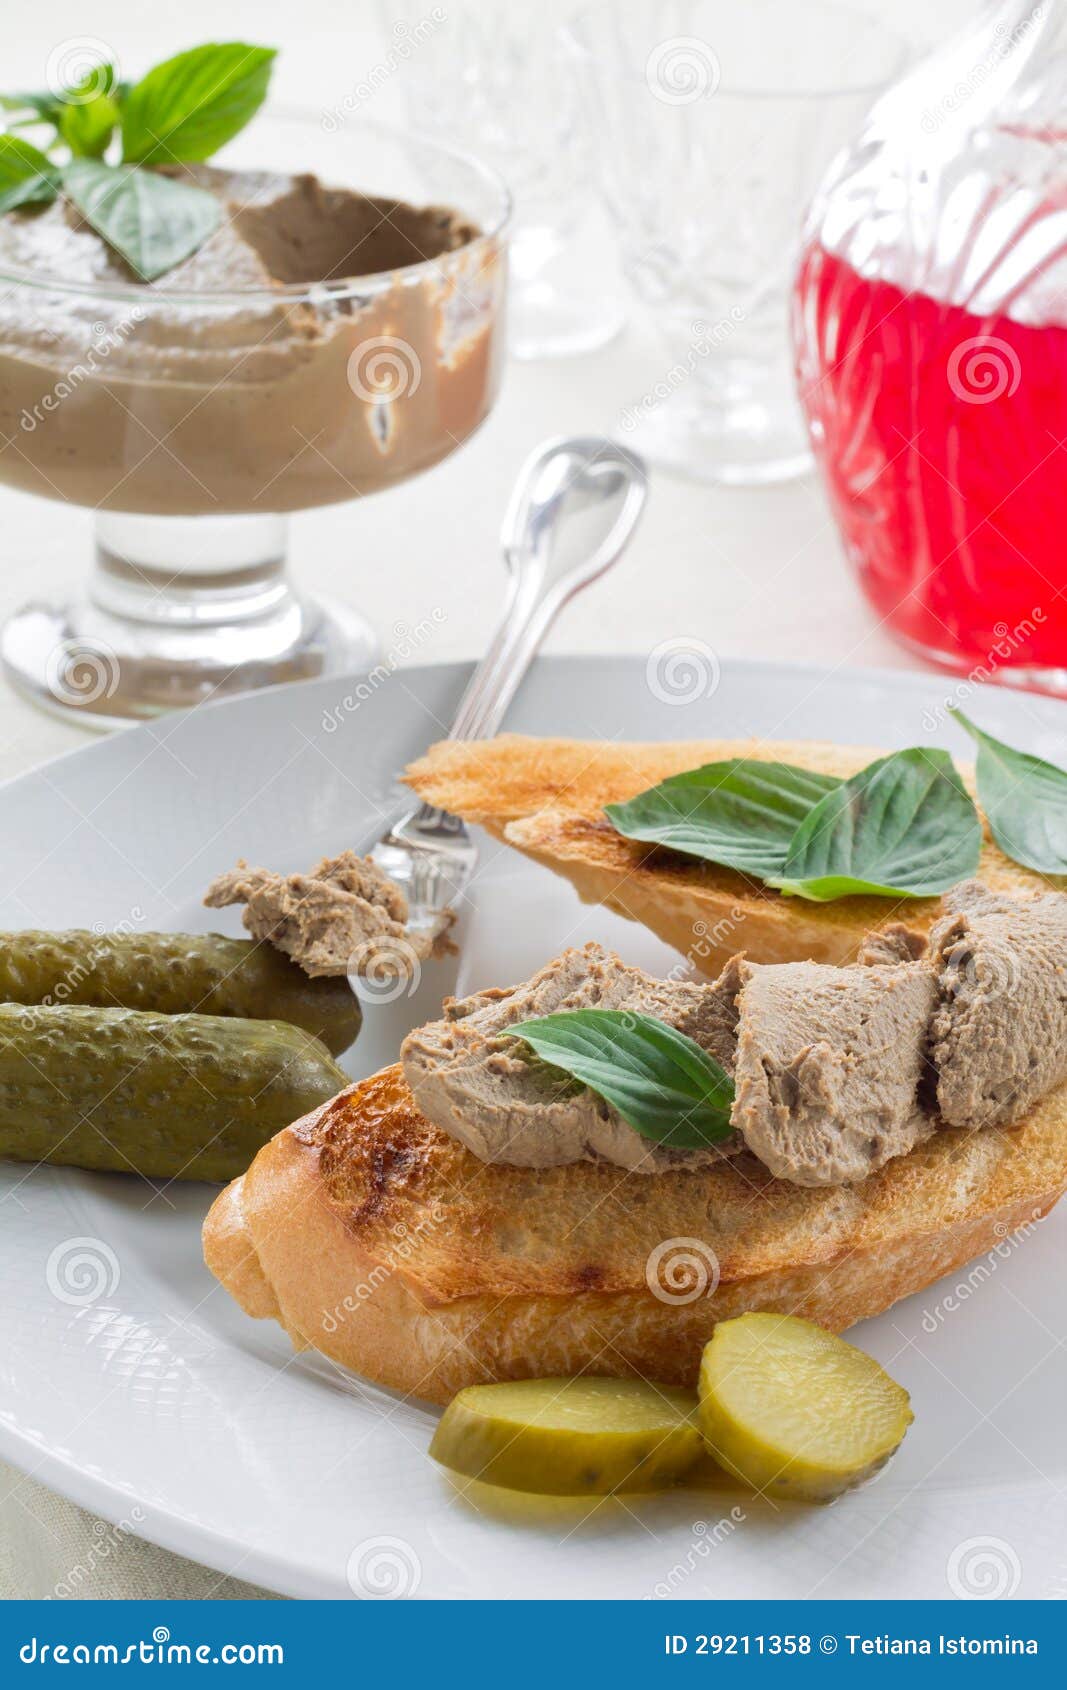 Chicken liver pate. Slice of toasted baguette with liver pate and gherkins